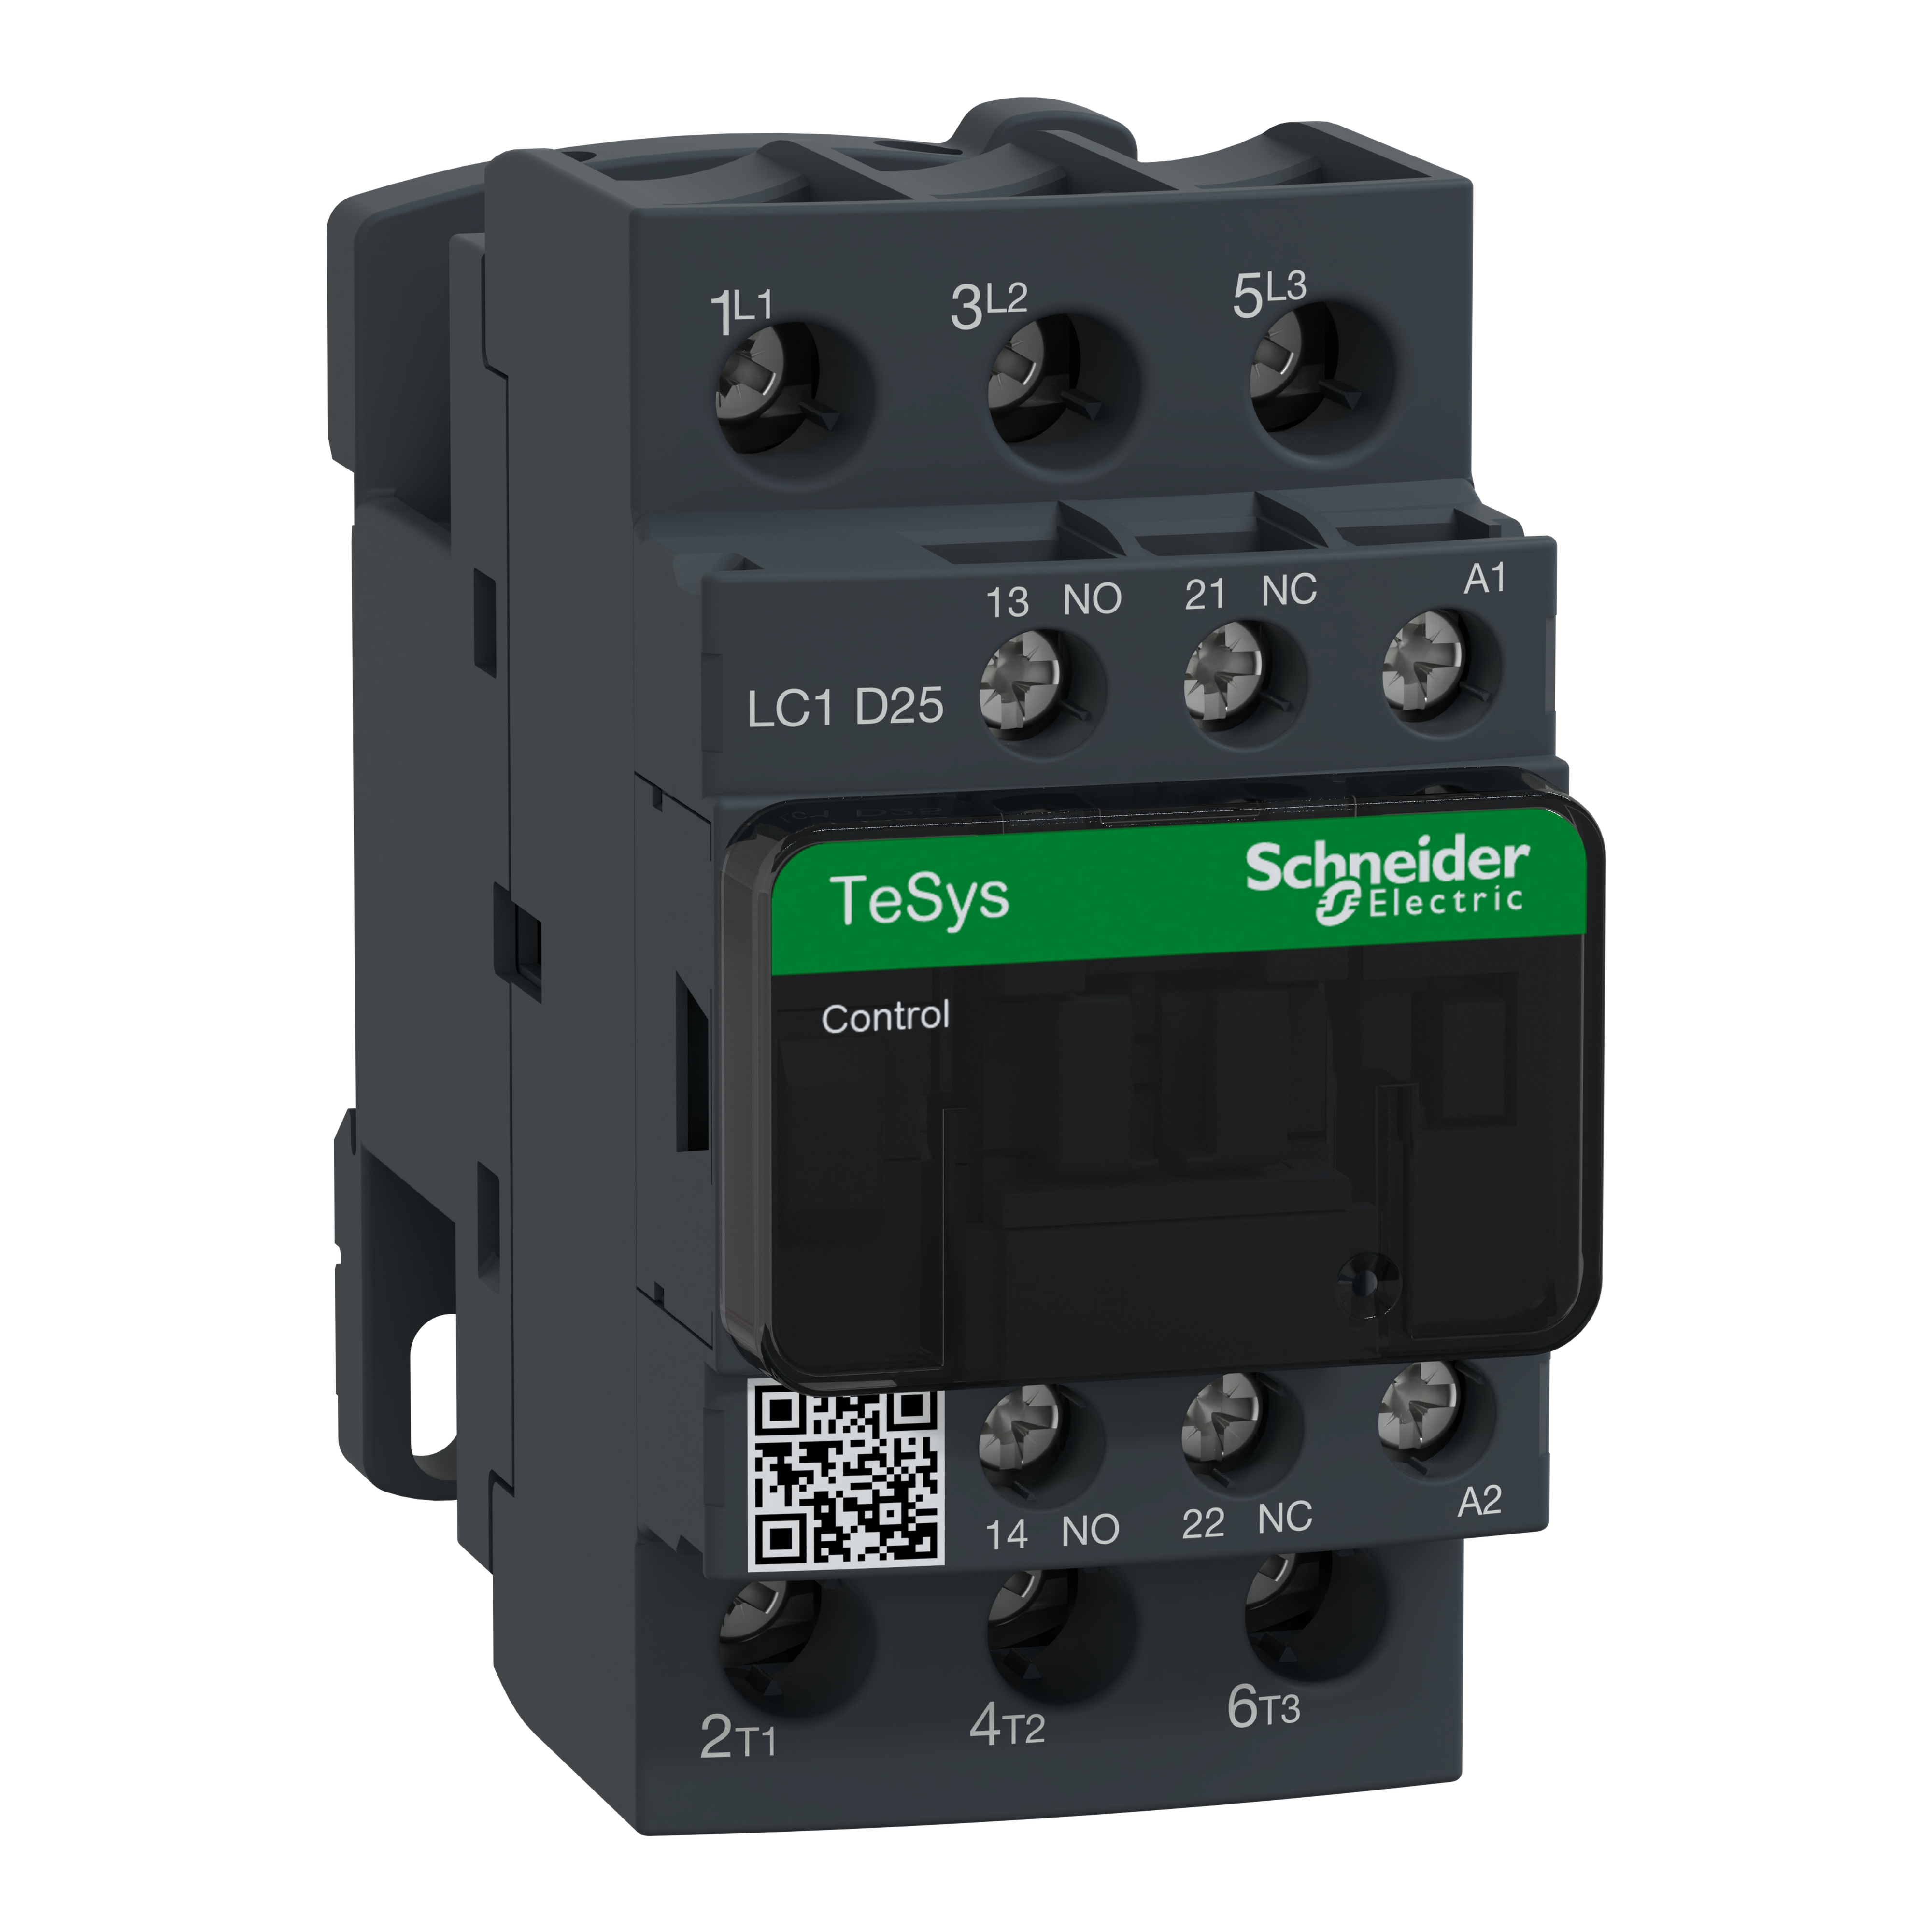 IEC contactor, TeSys Deca, nonreversing, 25A, 15HP at 480VAC, up to 100kA SCCR, 3 phase, 3 NO, 120VAC 50/60Hz coil, open